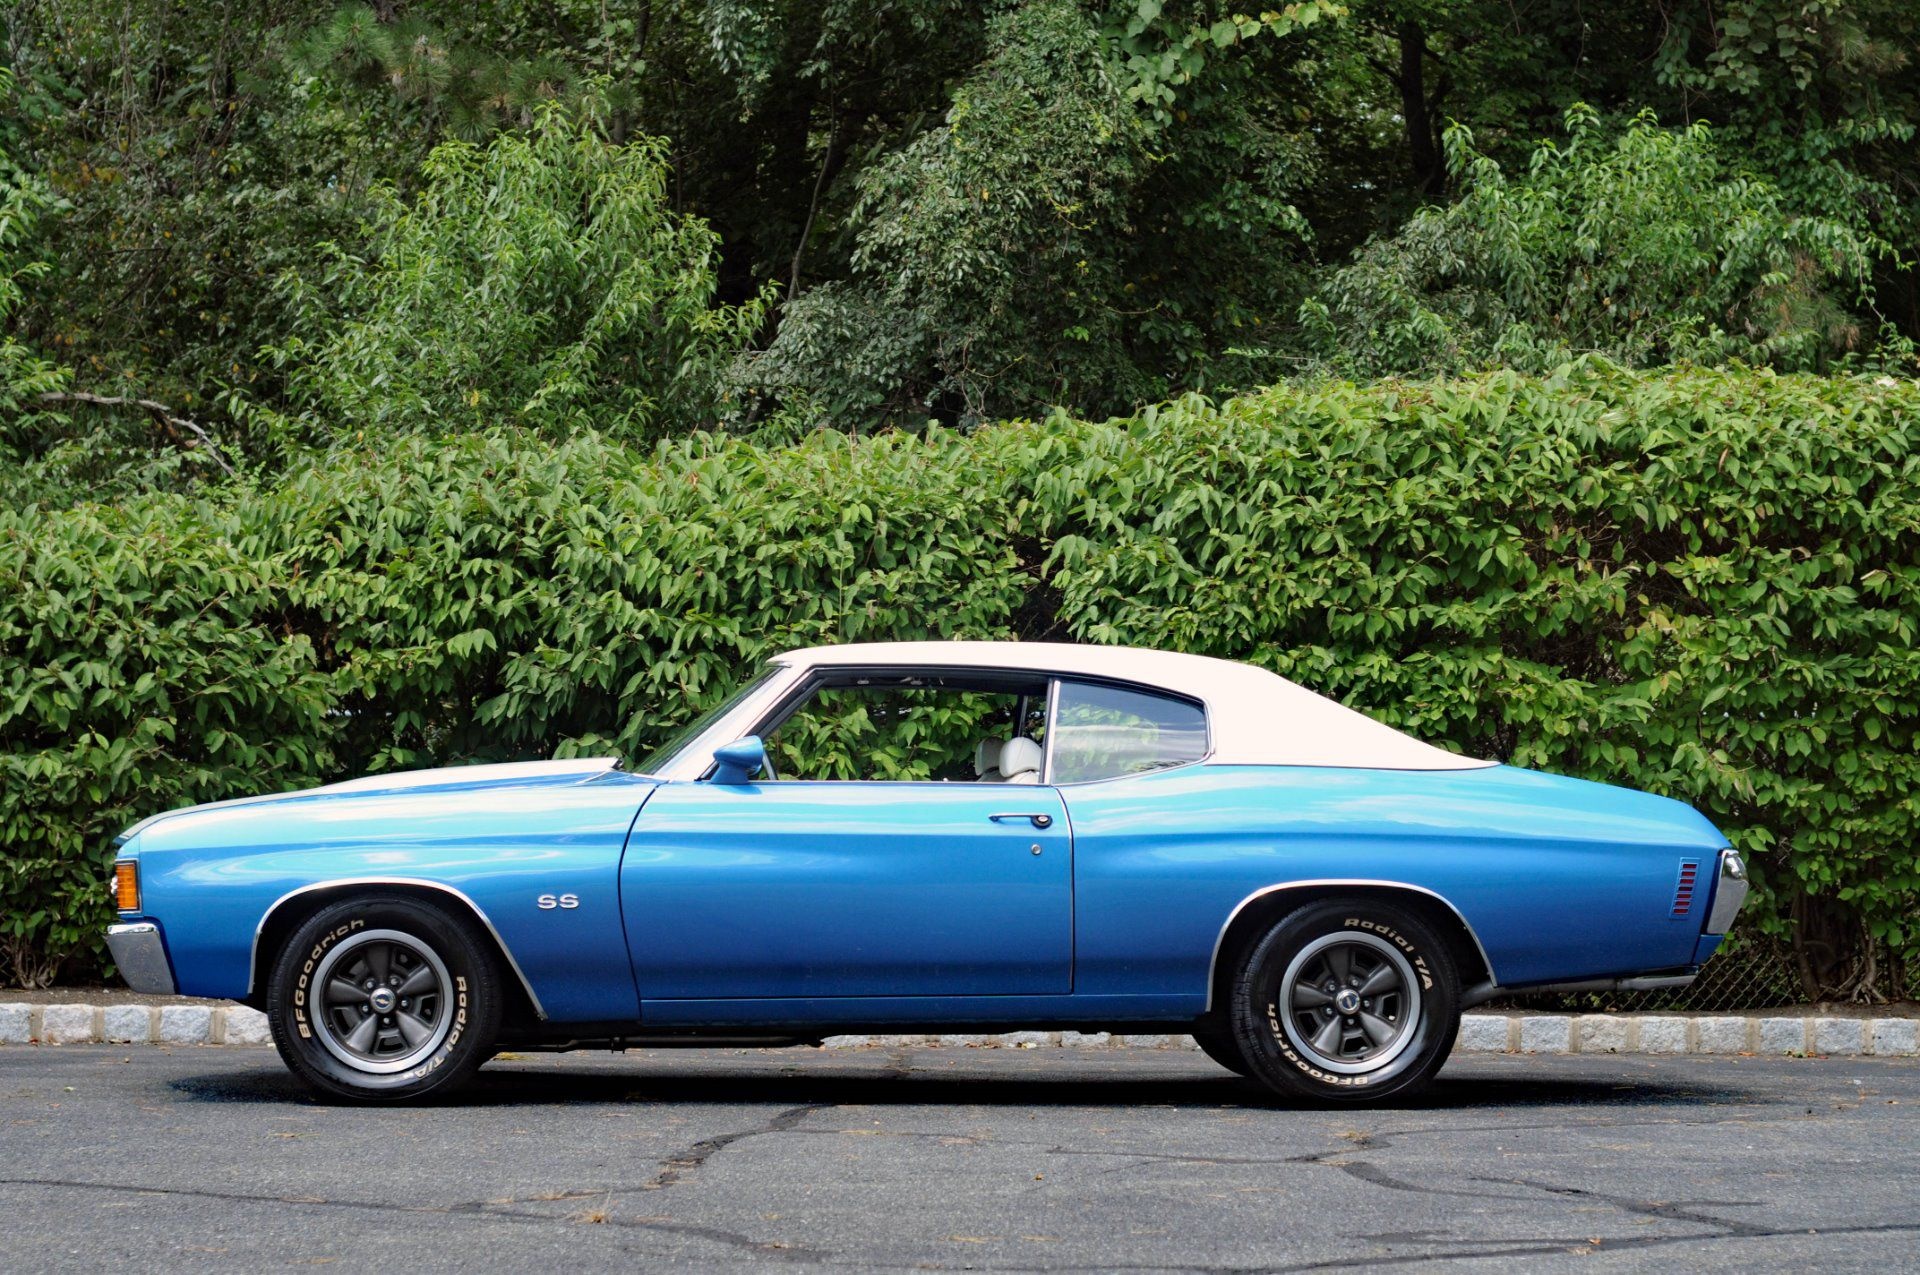 1972 Chevrolet Chevelle, Hemmings collector, Vintage auto, Classic muscle, Restored beauty, 1920x1280 HD Desktop